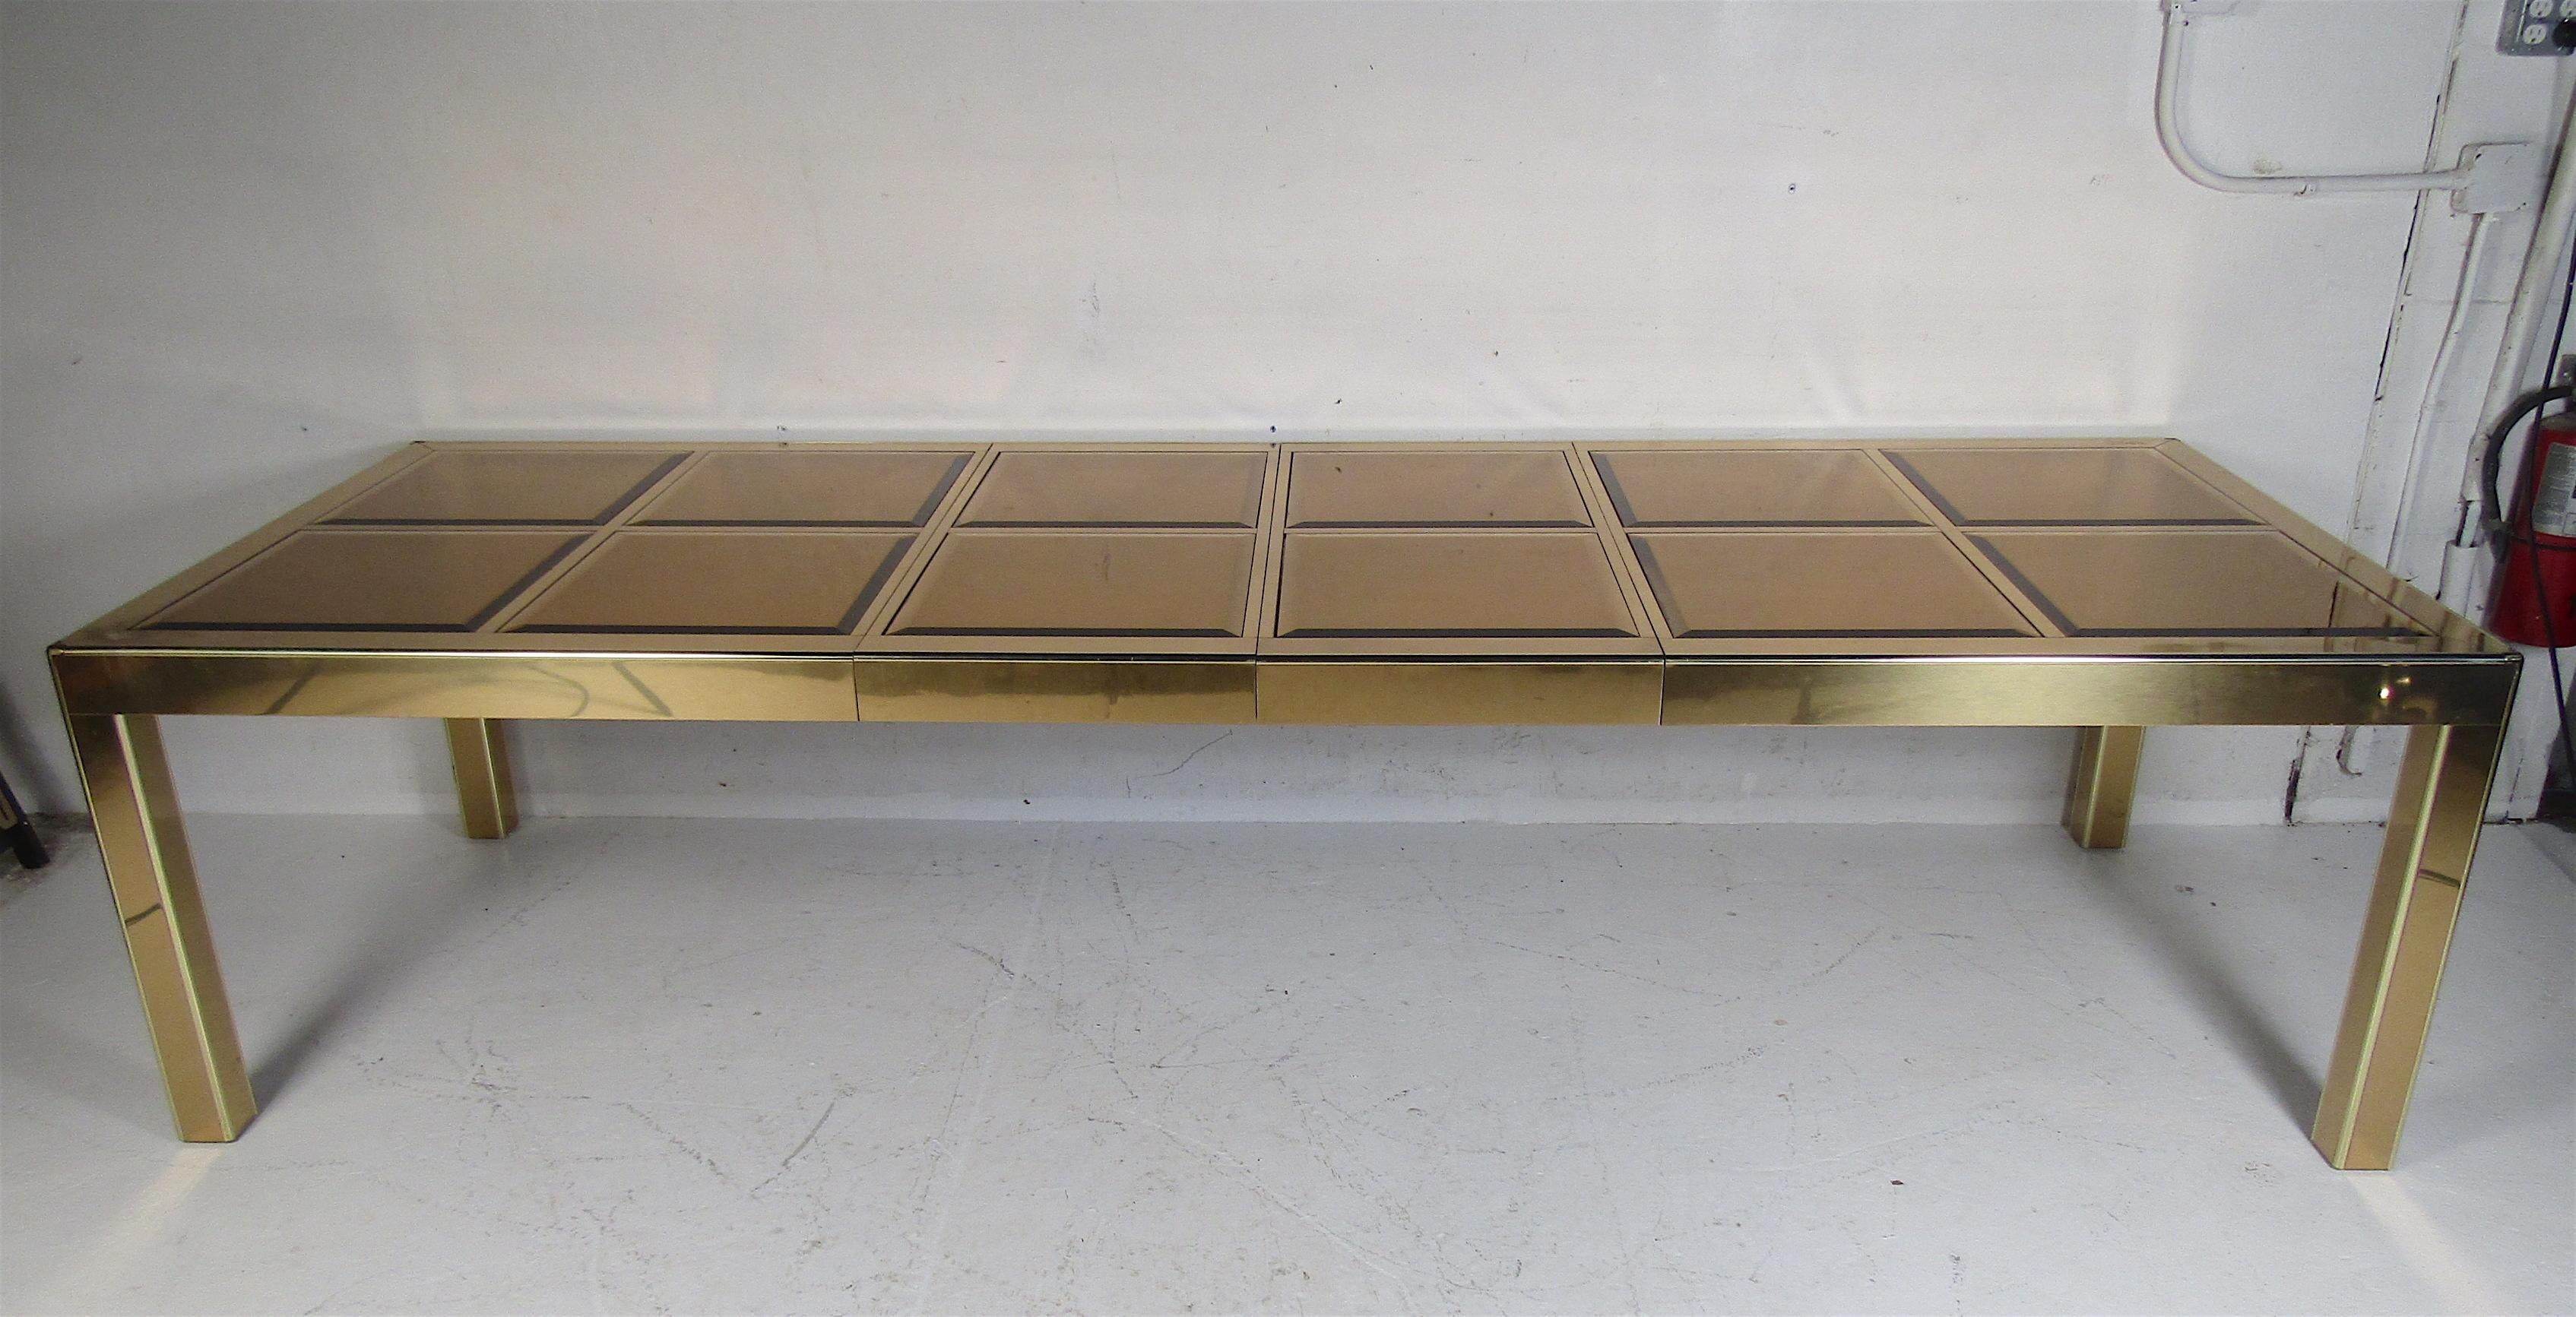 This elegant Mid-Century Modern dining table includes two leaves allowing this to extend from 81 inches wide all the way to 120.5 inches wide. Twelve bronze colored mirror top inserts with beveled edges sit comfortably into their designated